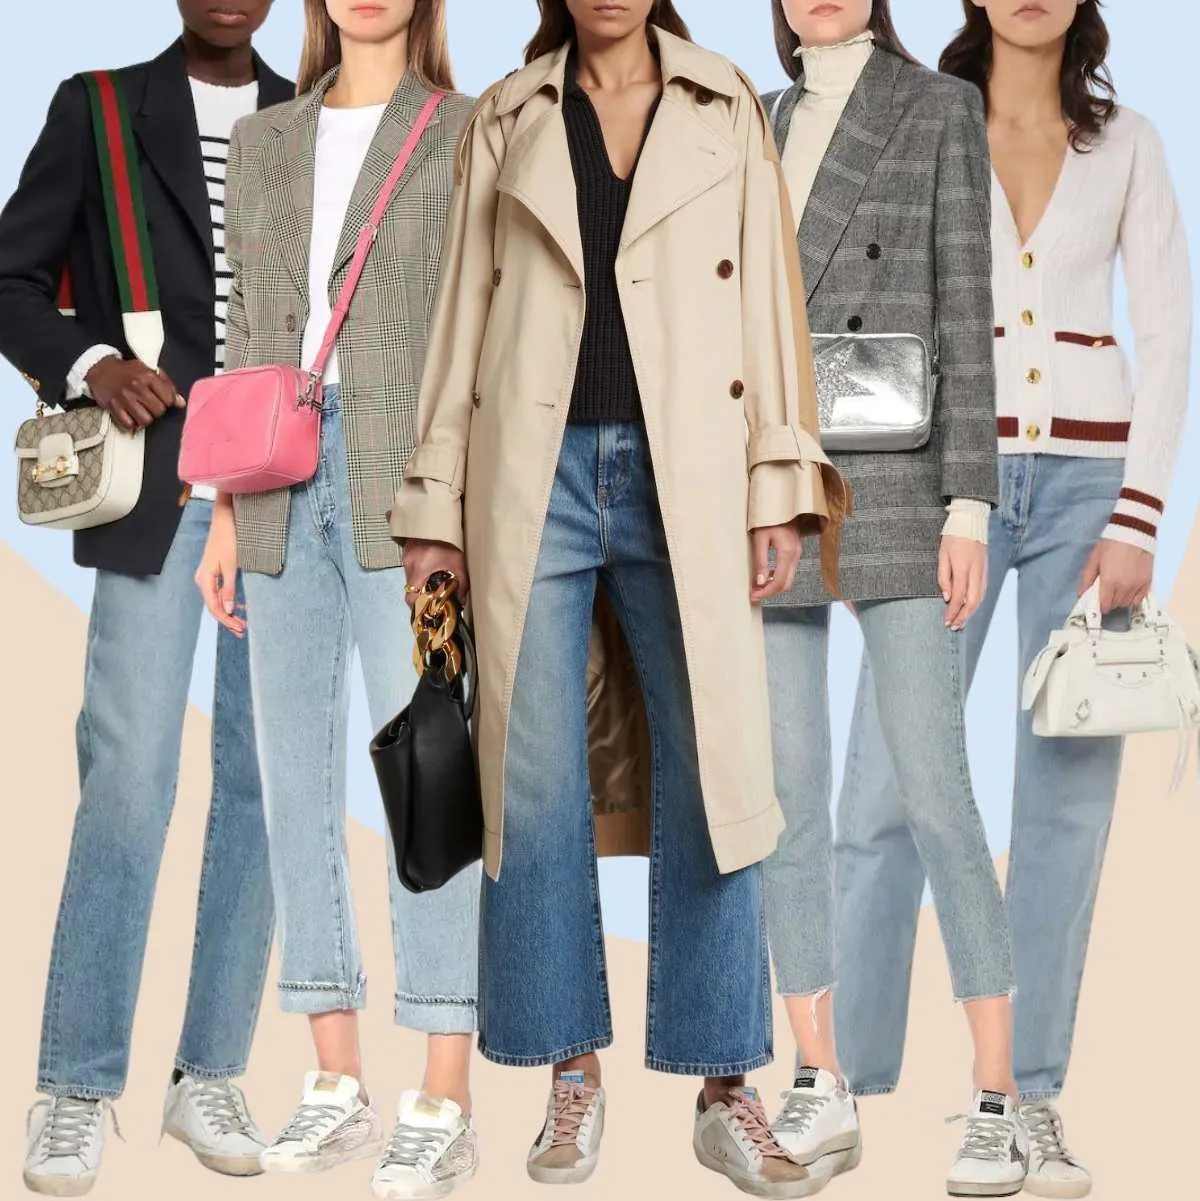 Collage of 5 women wearing different preppy golden goose outfits with jeans.